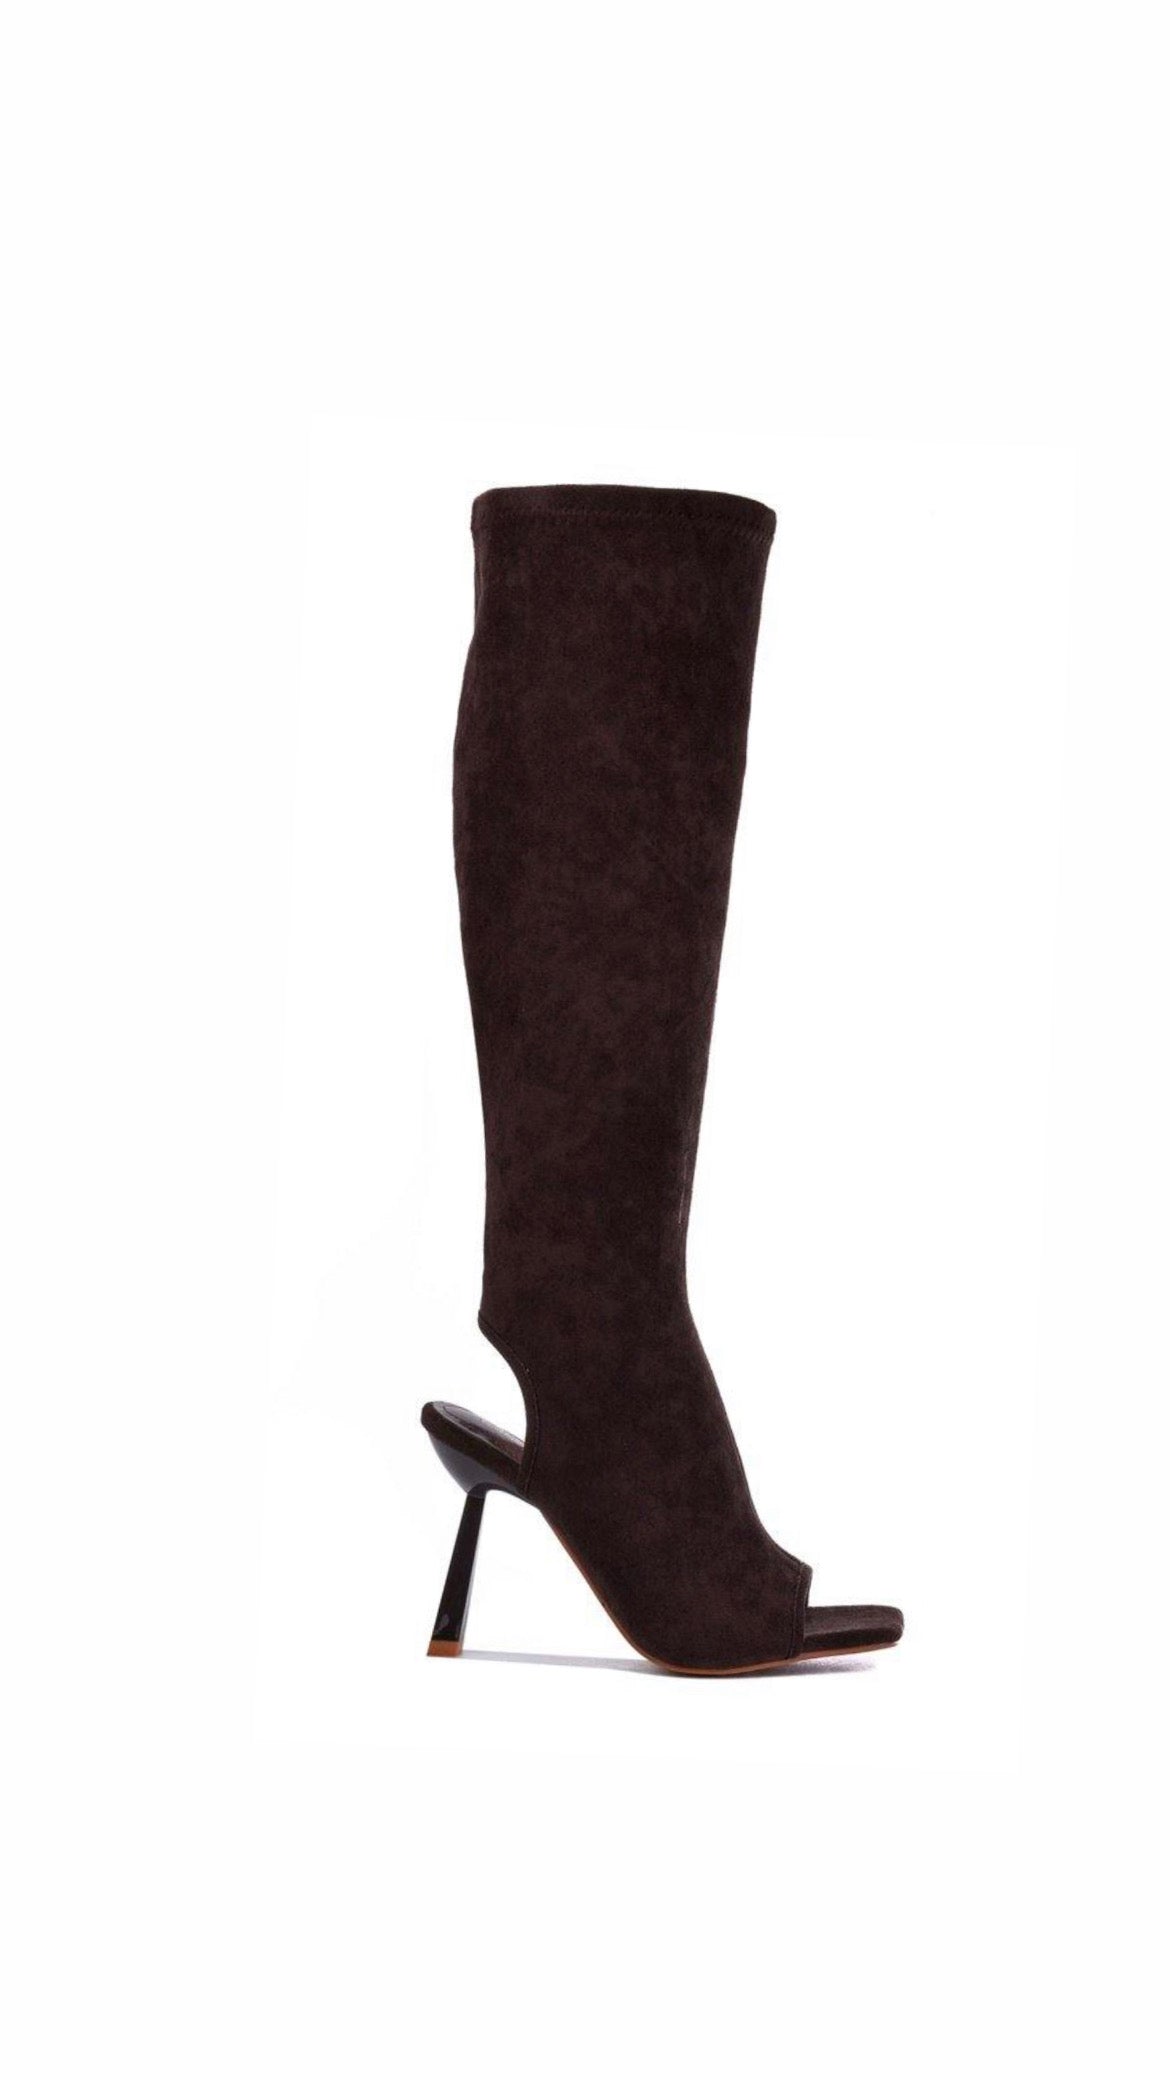 Taylor thigh high boot